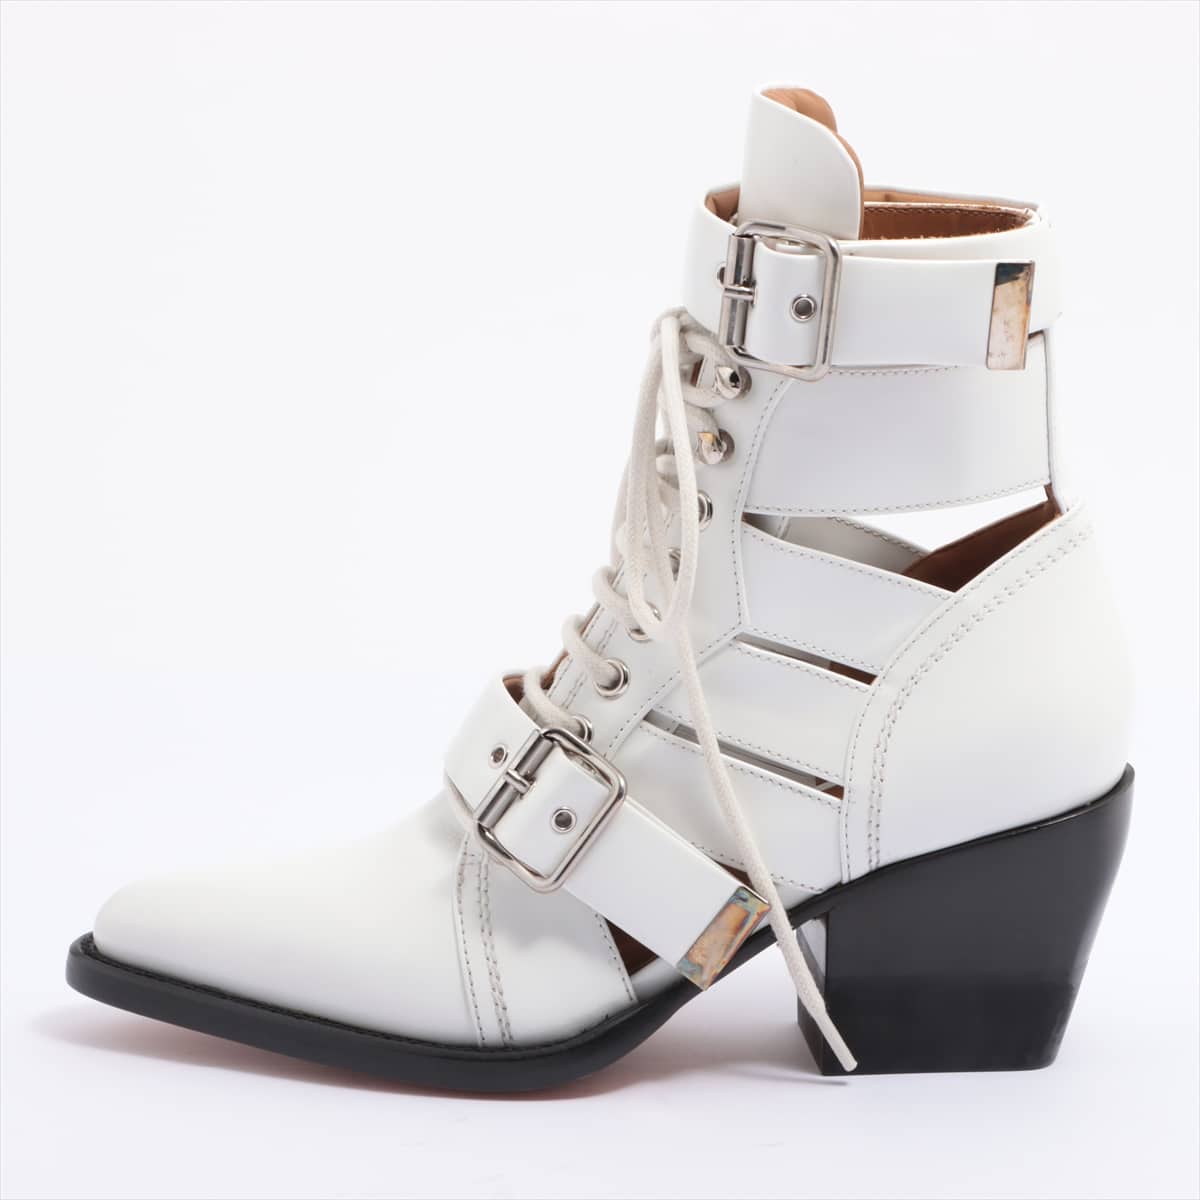 Chloe RYLEE Leather Boots 35.5 Ladies' White